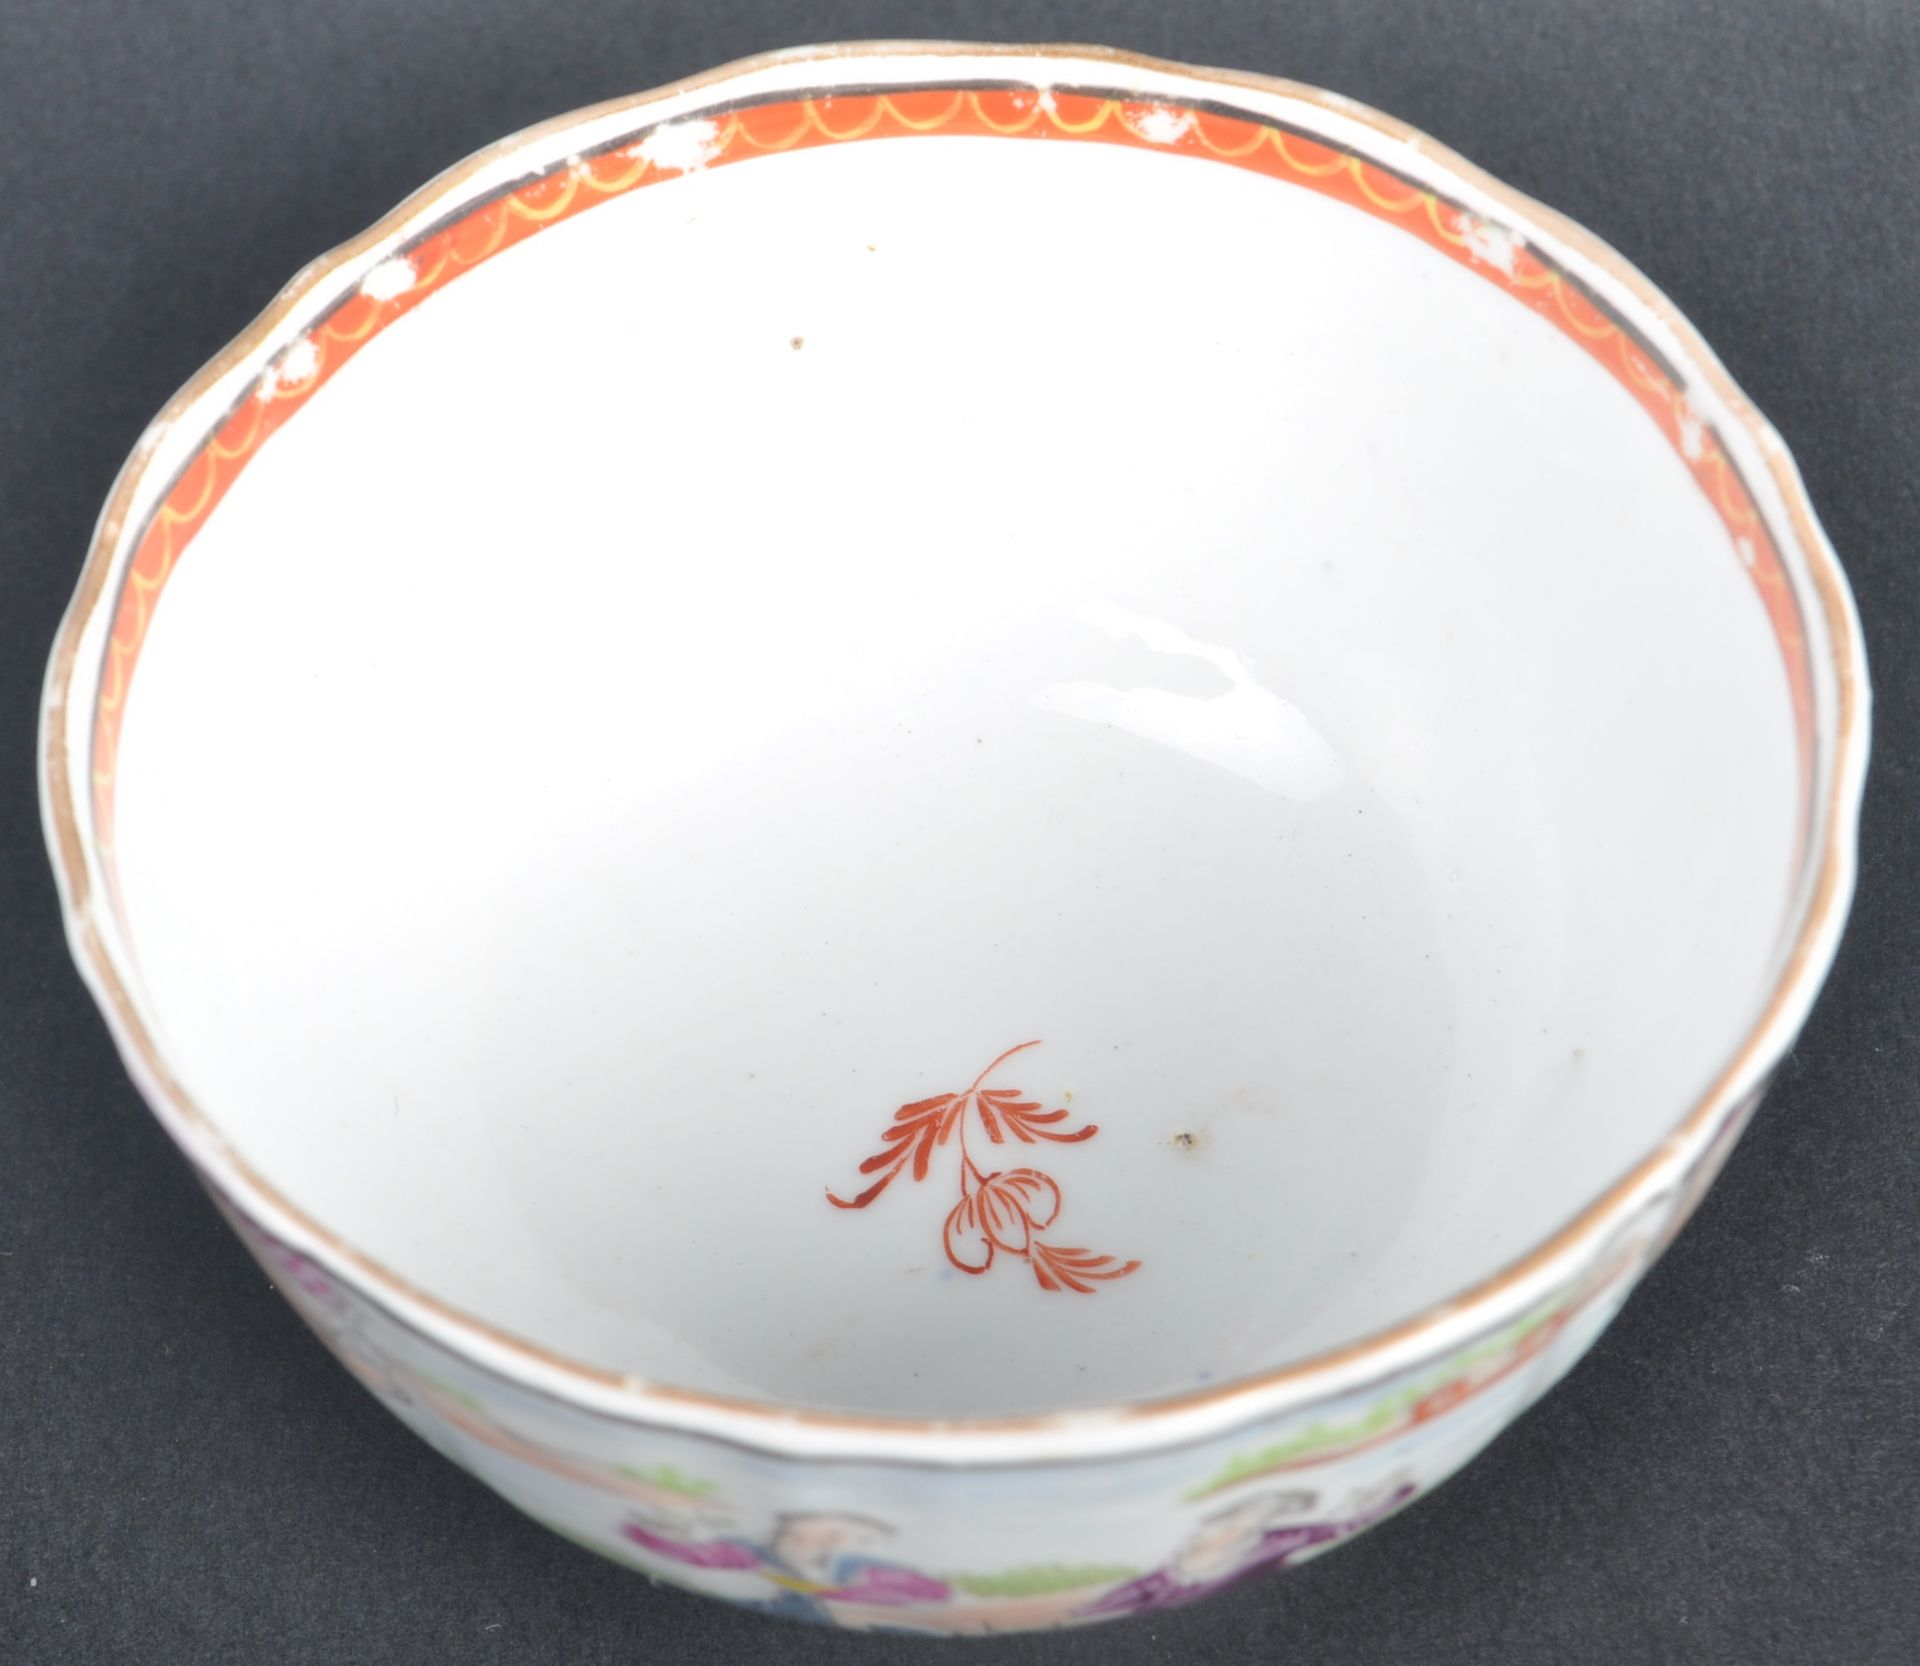 19TH CENTURY CHINESE EXPORT PORCELAIN TEACUP - Image 3 of 4